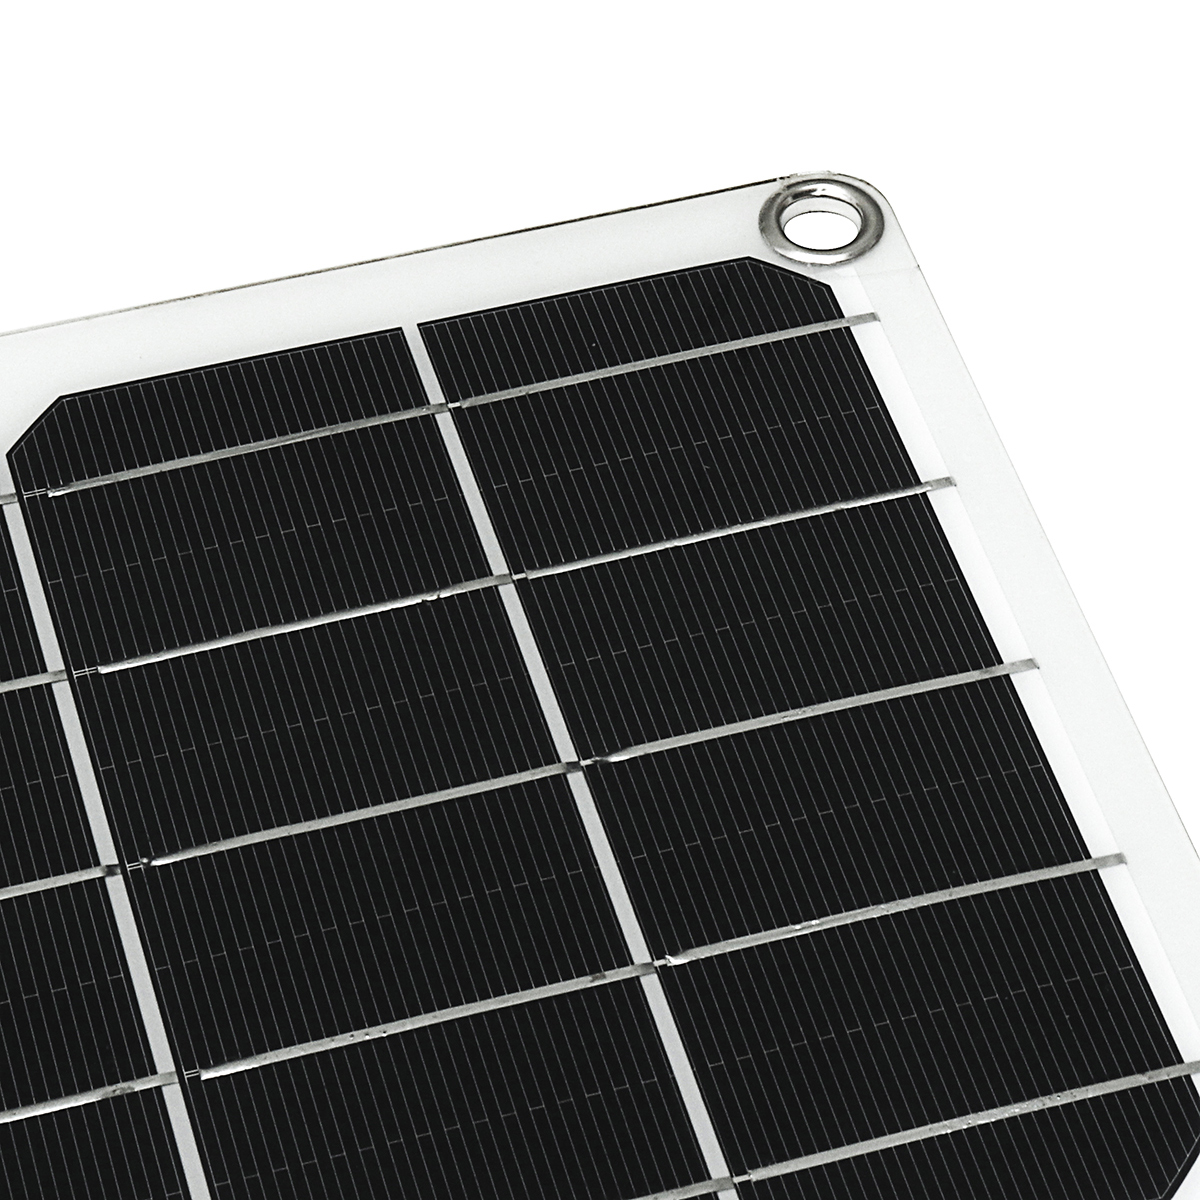 80W-PET-Flexible-Dual-USB-Solar-Panel-DC-Output-Battery-Charger-Roof-Boat-Car-1548764-8